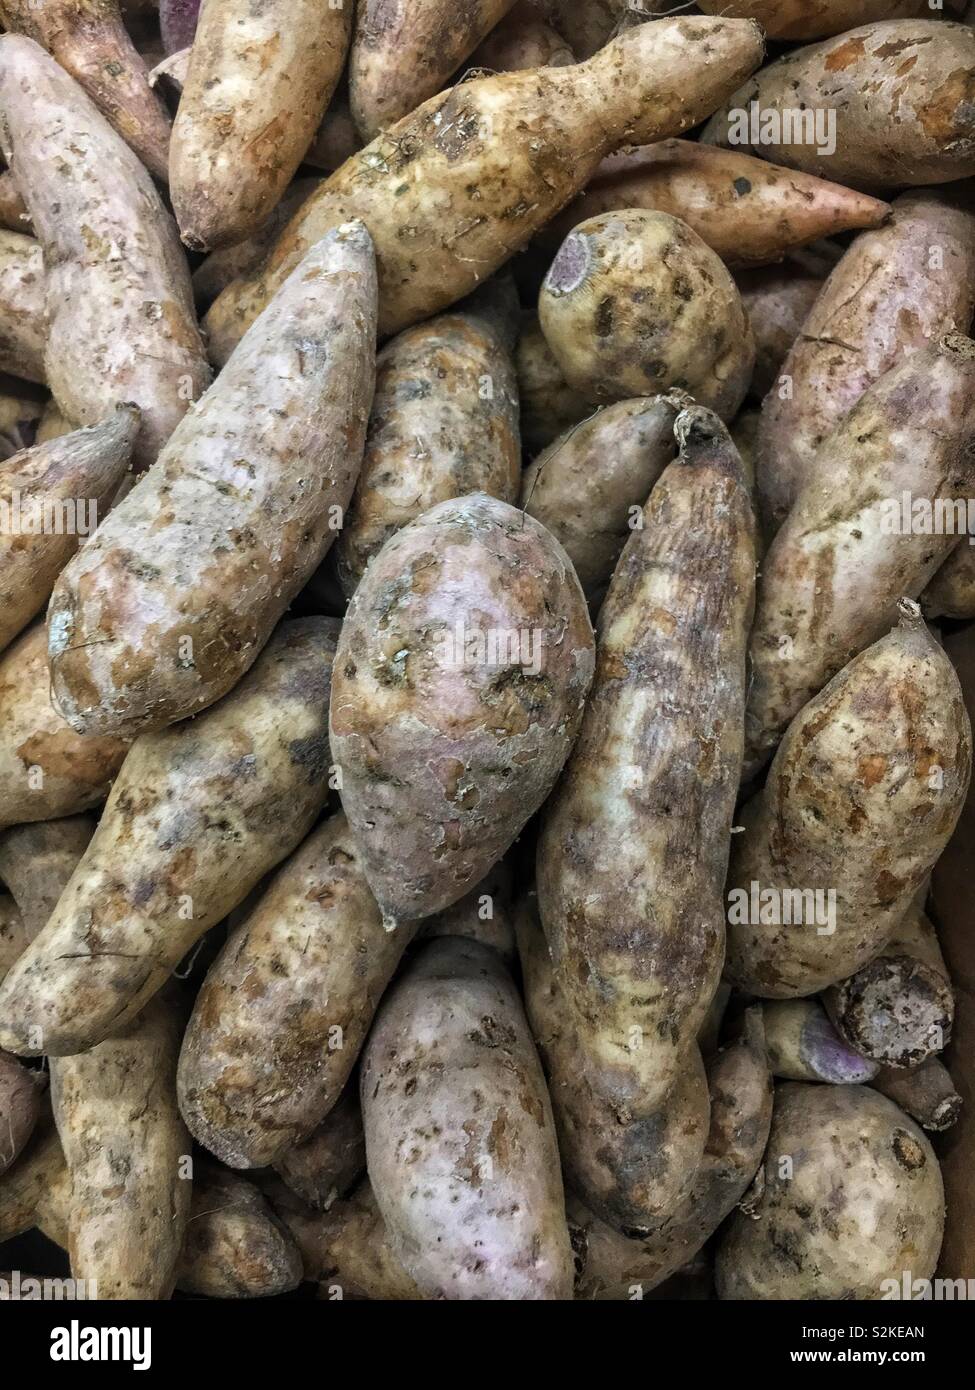 Full frame of fresh delicious ripe Dioscorea alata, purple yams, ube, or greater yams on display and for sale at the local produce market. Stock Photo